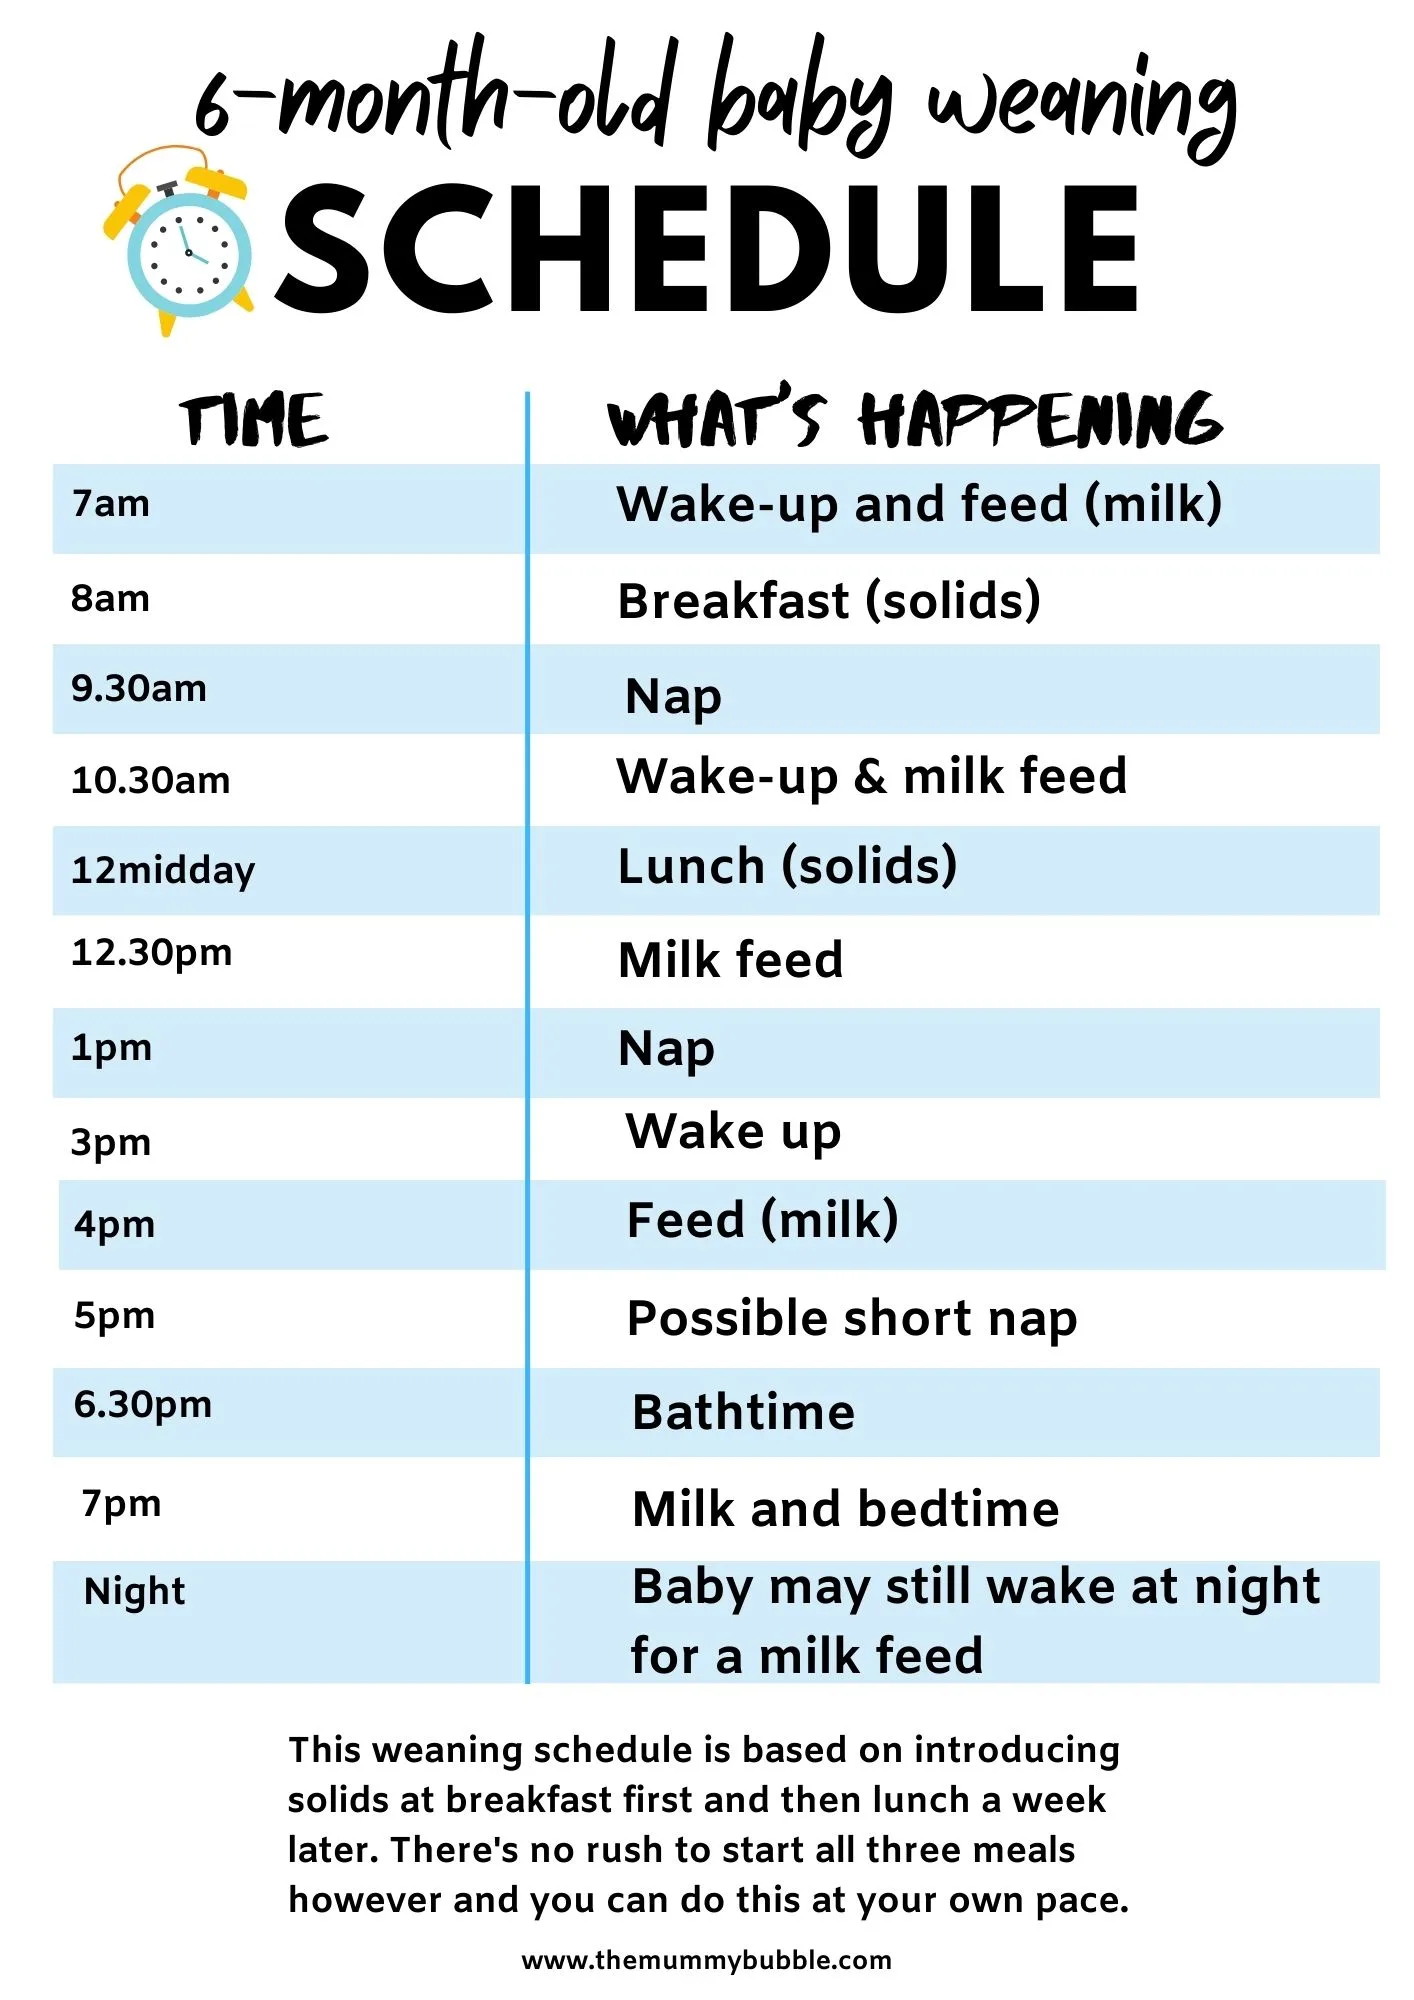 Perfect daily schedule for a 6-month-old baby - The Mummy Bubble